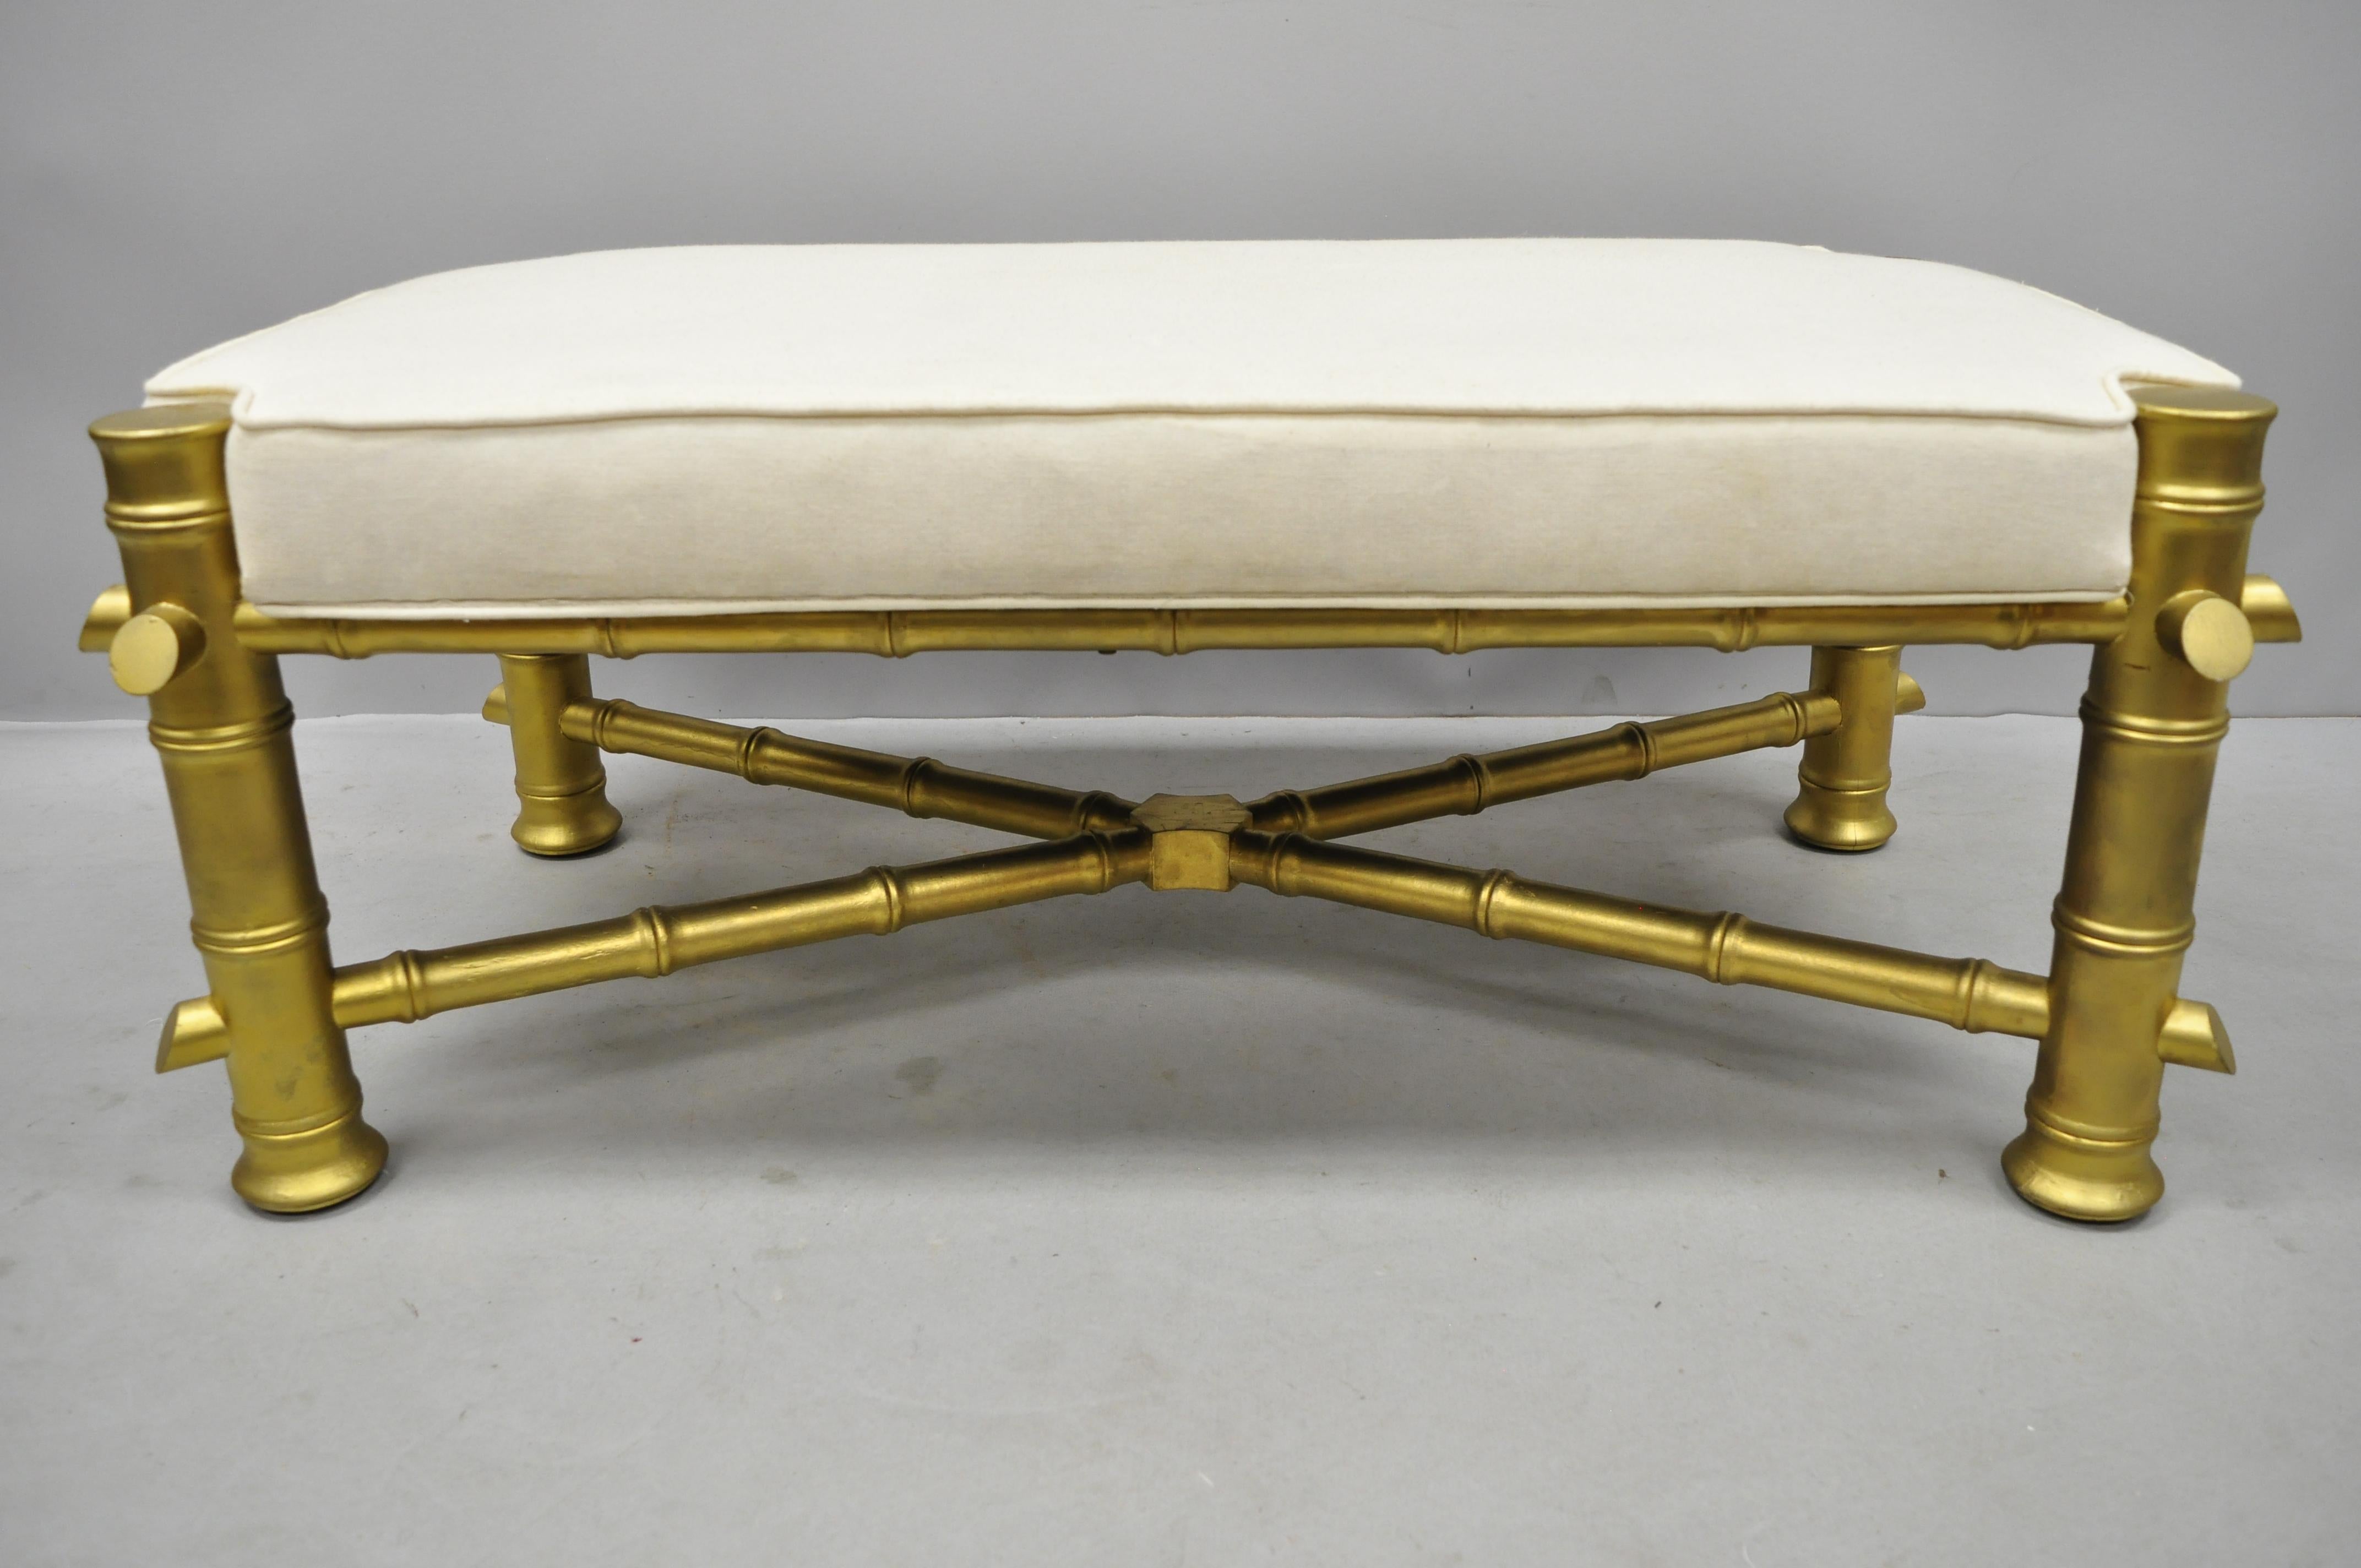 Vintage gold faux bamboo Chinese Chippendale style upholstered X-frame bench. Item features gold painted finish, stretcher base, solid wood construction, upholstered seat, great style and form, circa mid-20th century. Measurements: 16.5